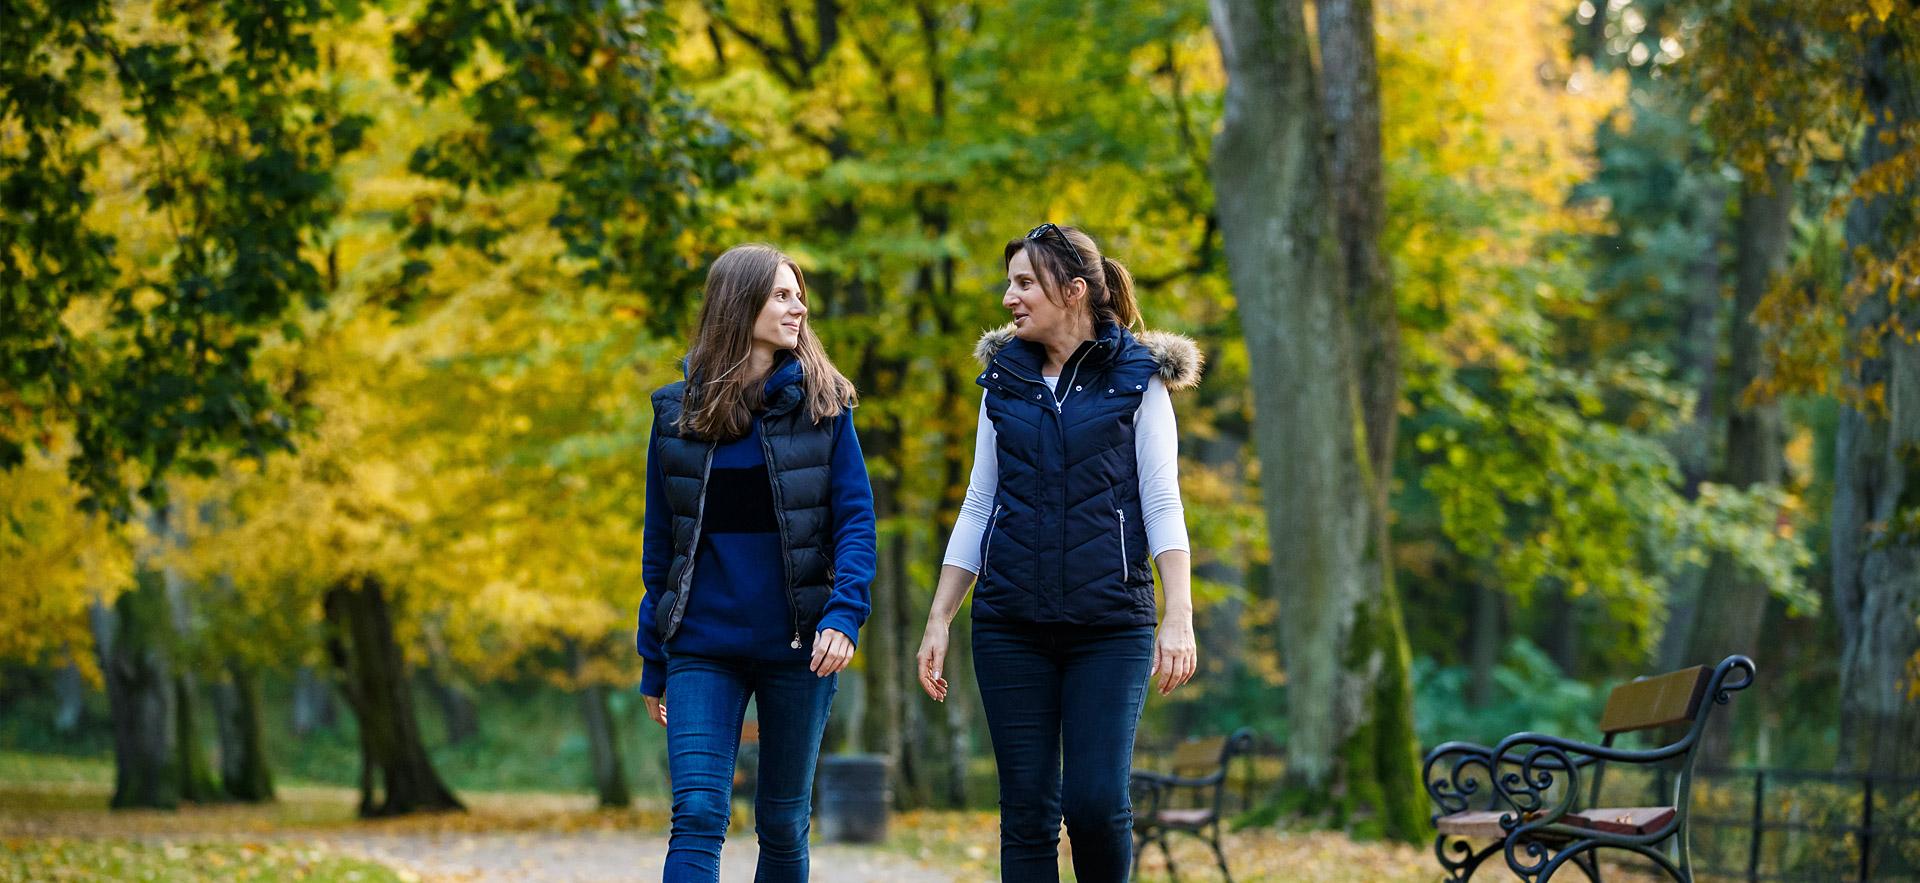 Two young women walking in park.